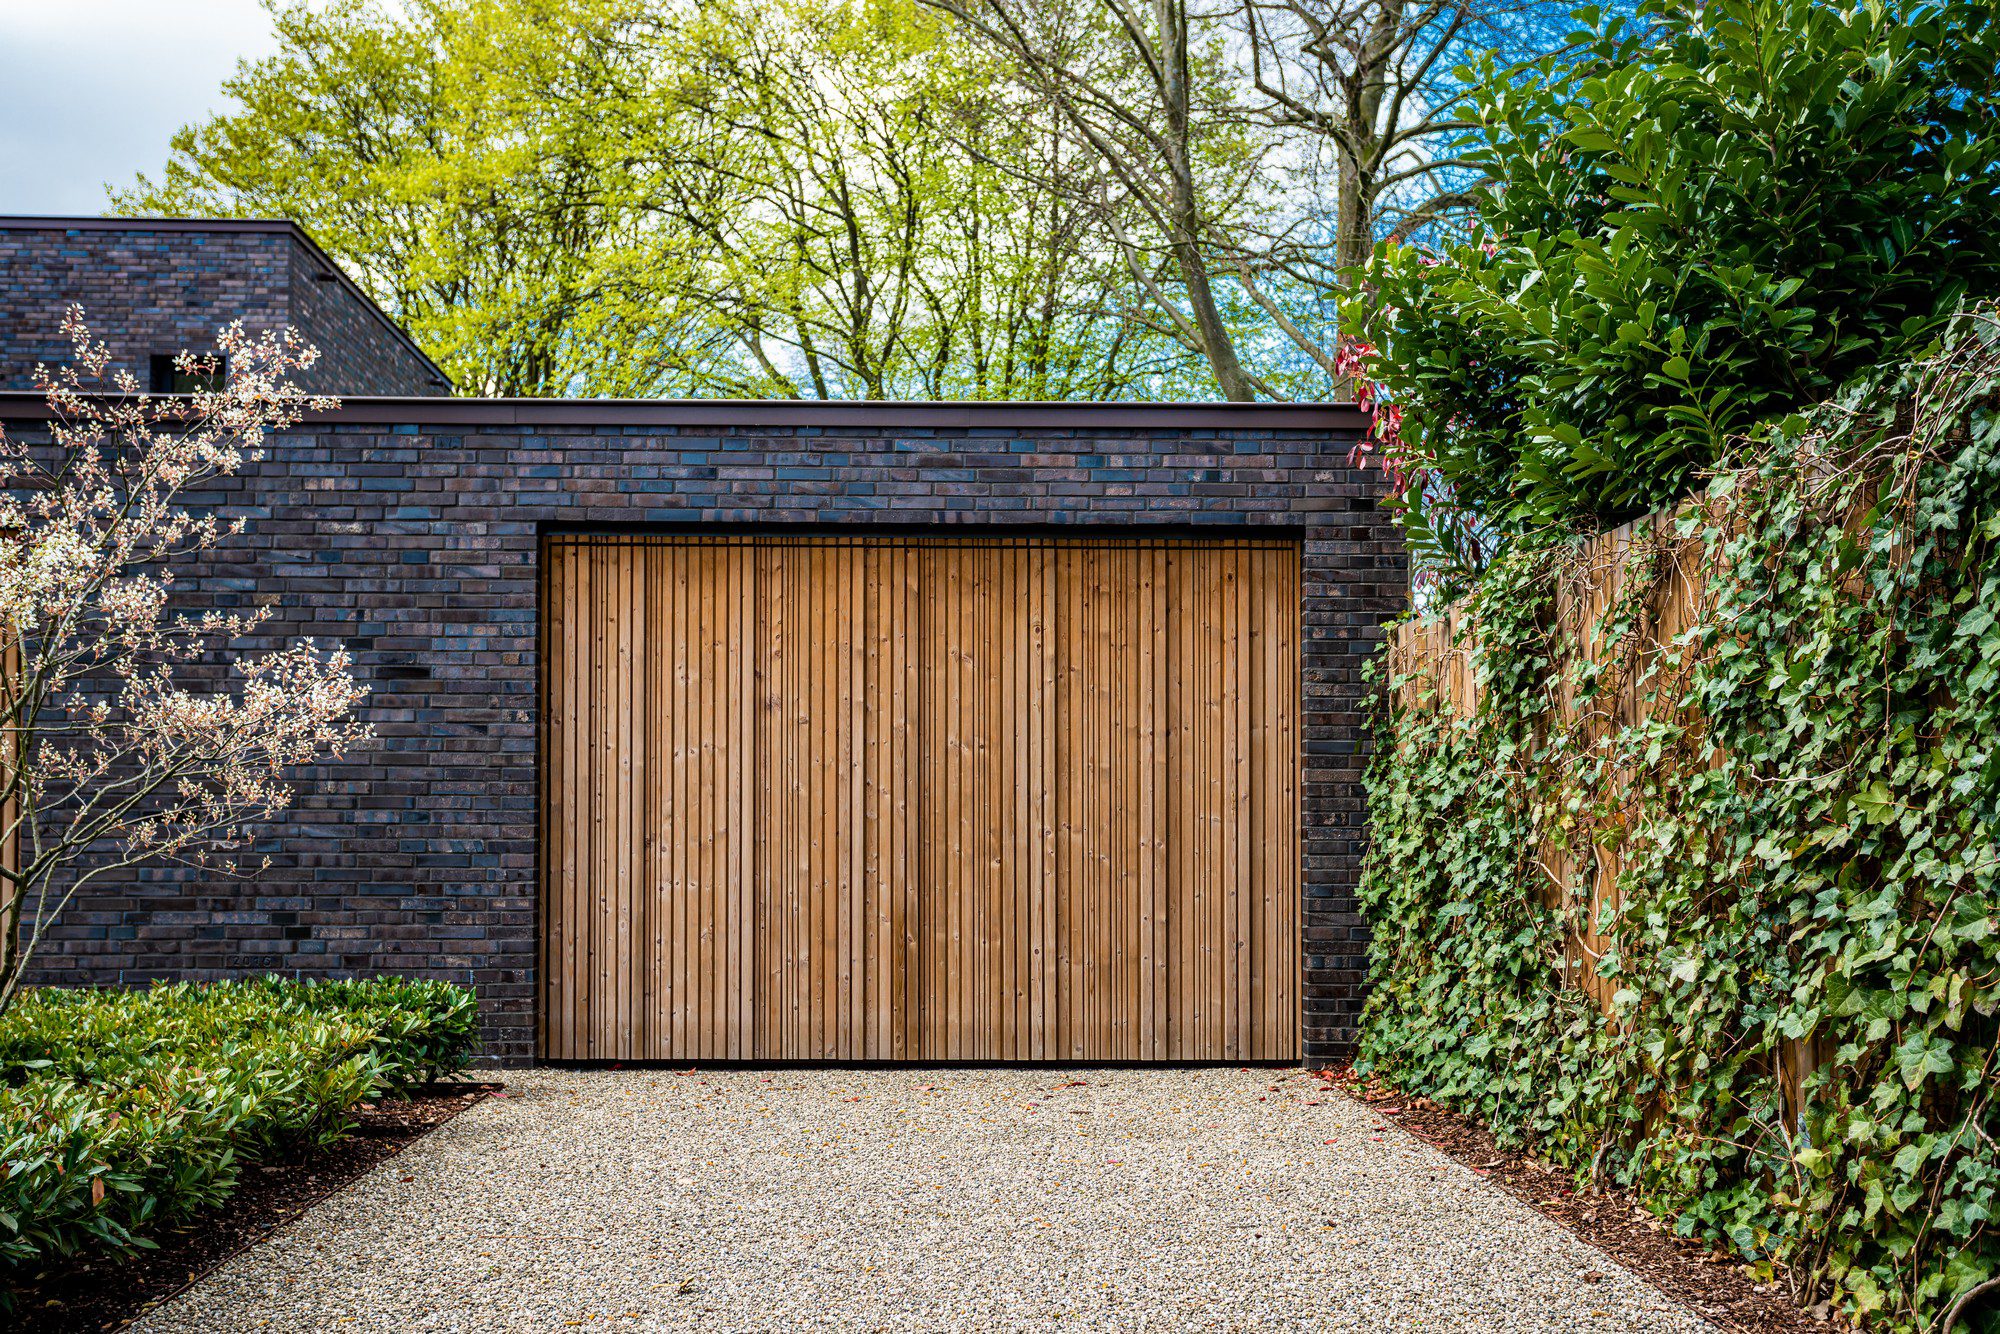 The image displays a modern garage with a wooden door set against a brick building. There's a clear contrast between the natural wooden texture of the garage door and the dark tones of the brick walls. A neatly maintained gravel driveway leads to the garage, bordered on one side by a patch of low shrubs and plants. On the other side, there's a wall overgrown with climbing ivy, next to which stands a large green bush and a tree with budding flowers, suggesting that it might be springtime. The foliage and trees visible in the image add a fresh, natural touch to the architectural elements.